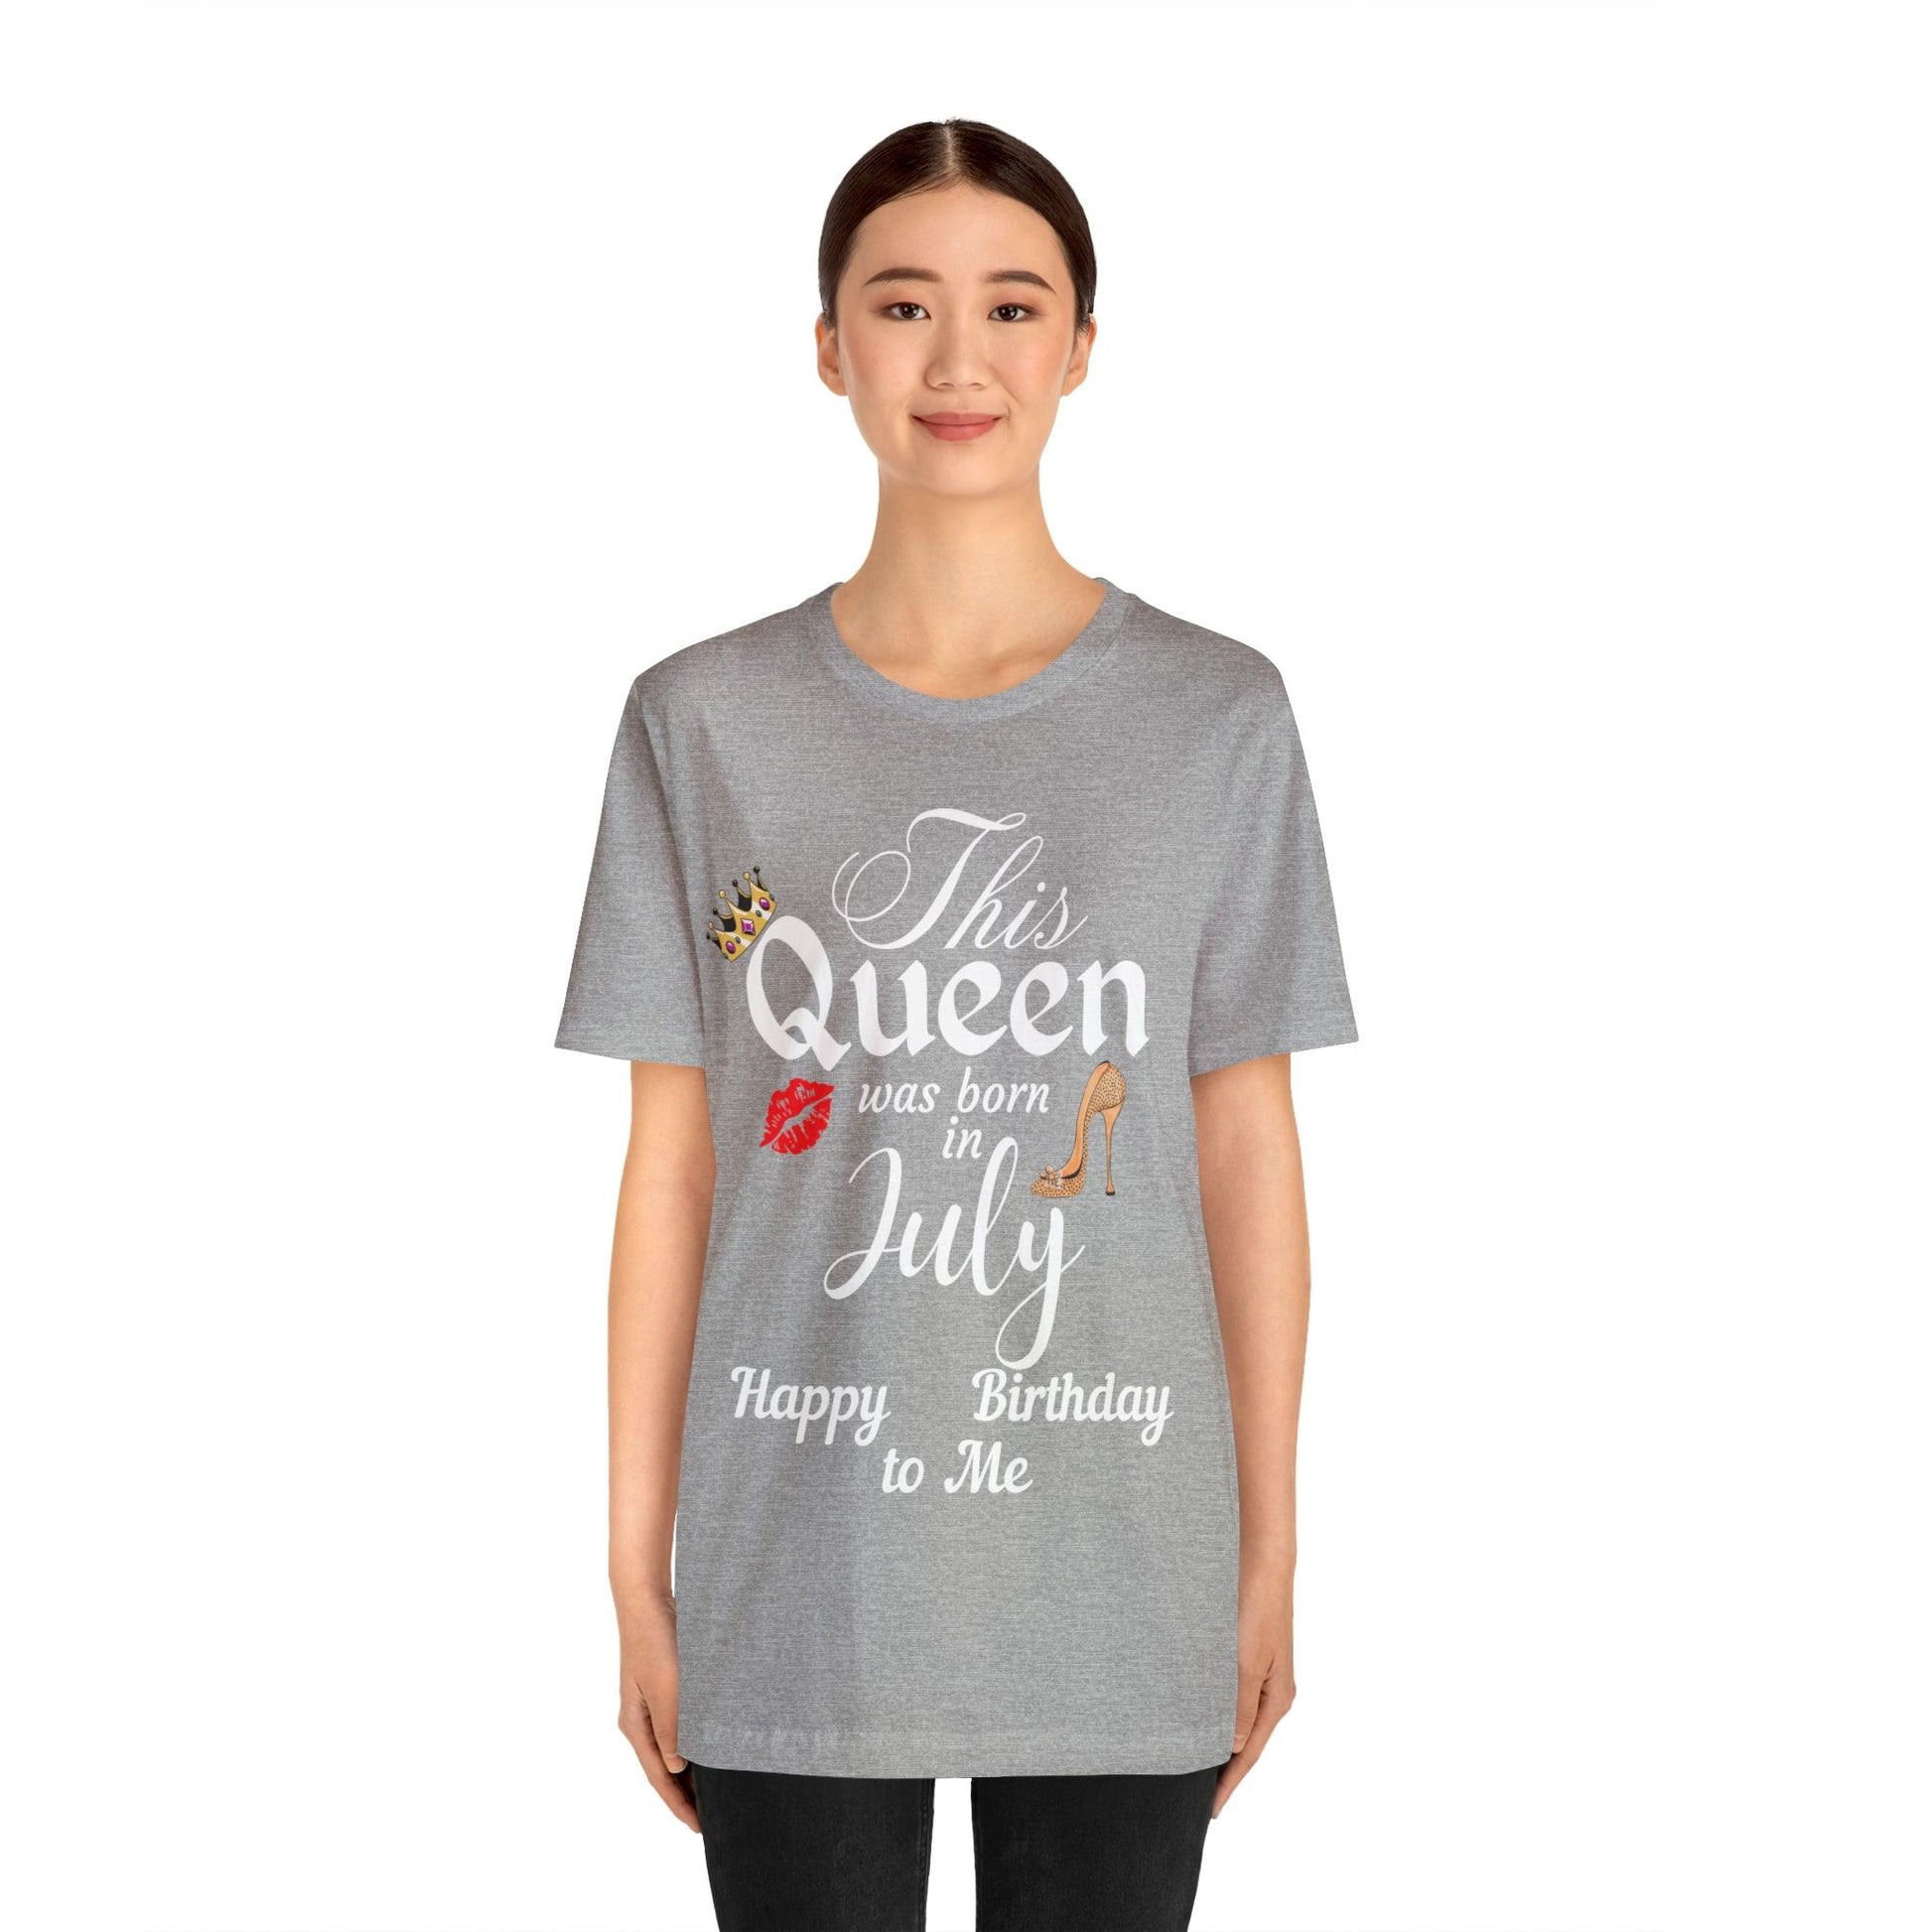 Birthday Queen Shirt, Gift for Birthday, This Queen was born in July Shirt, Funny Queen Shirt, Funny Birthday Shirt, Birthday Gift - Giftsmojo